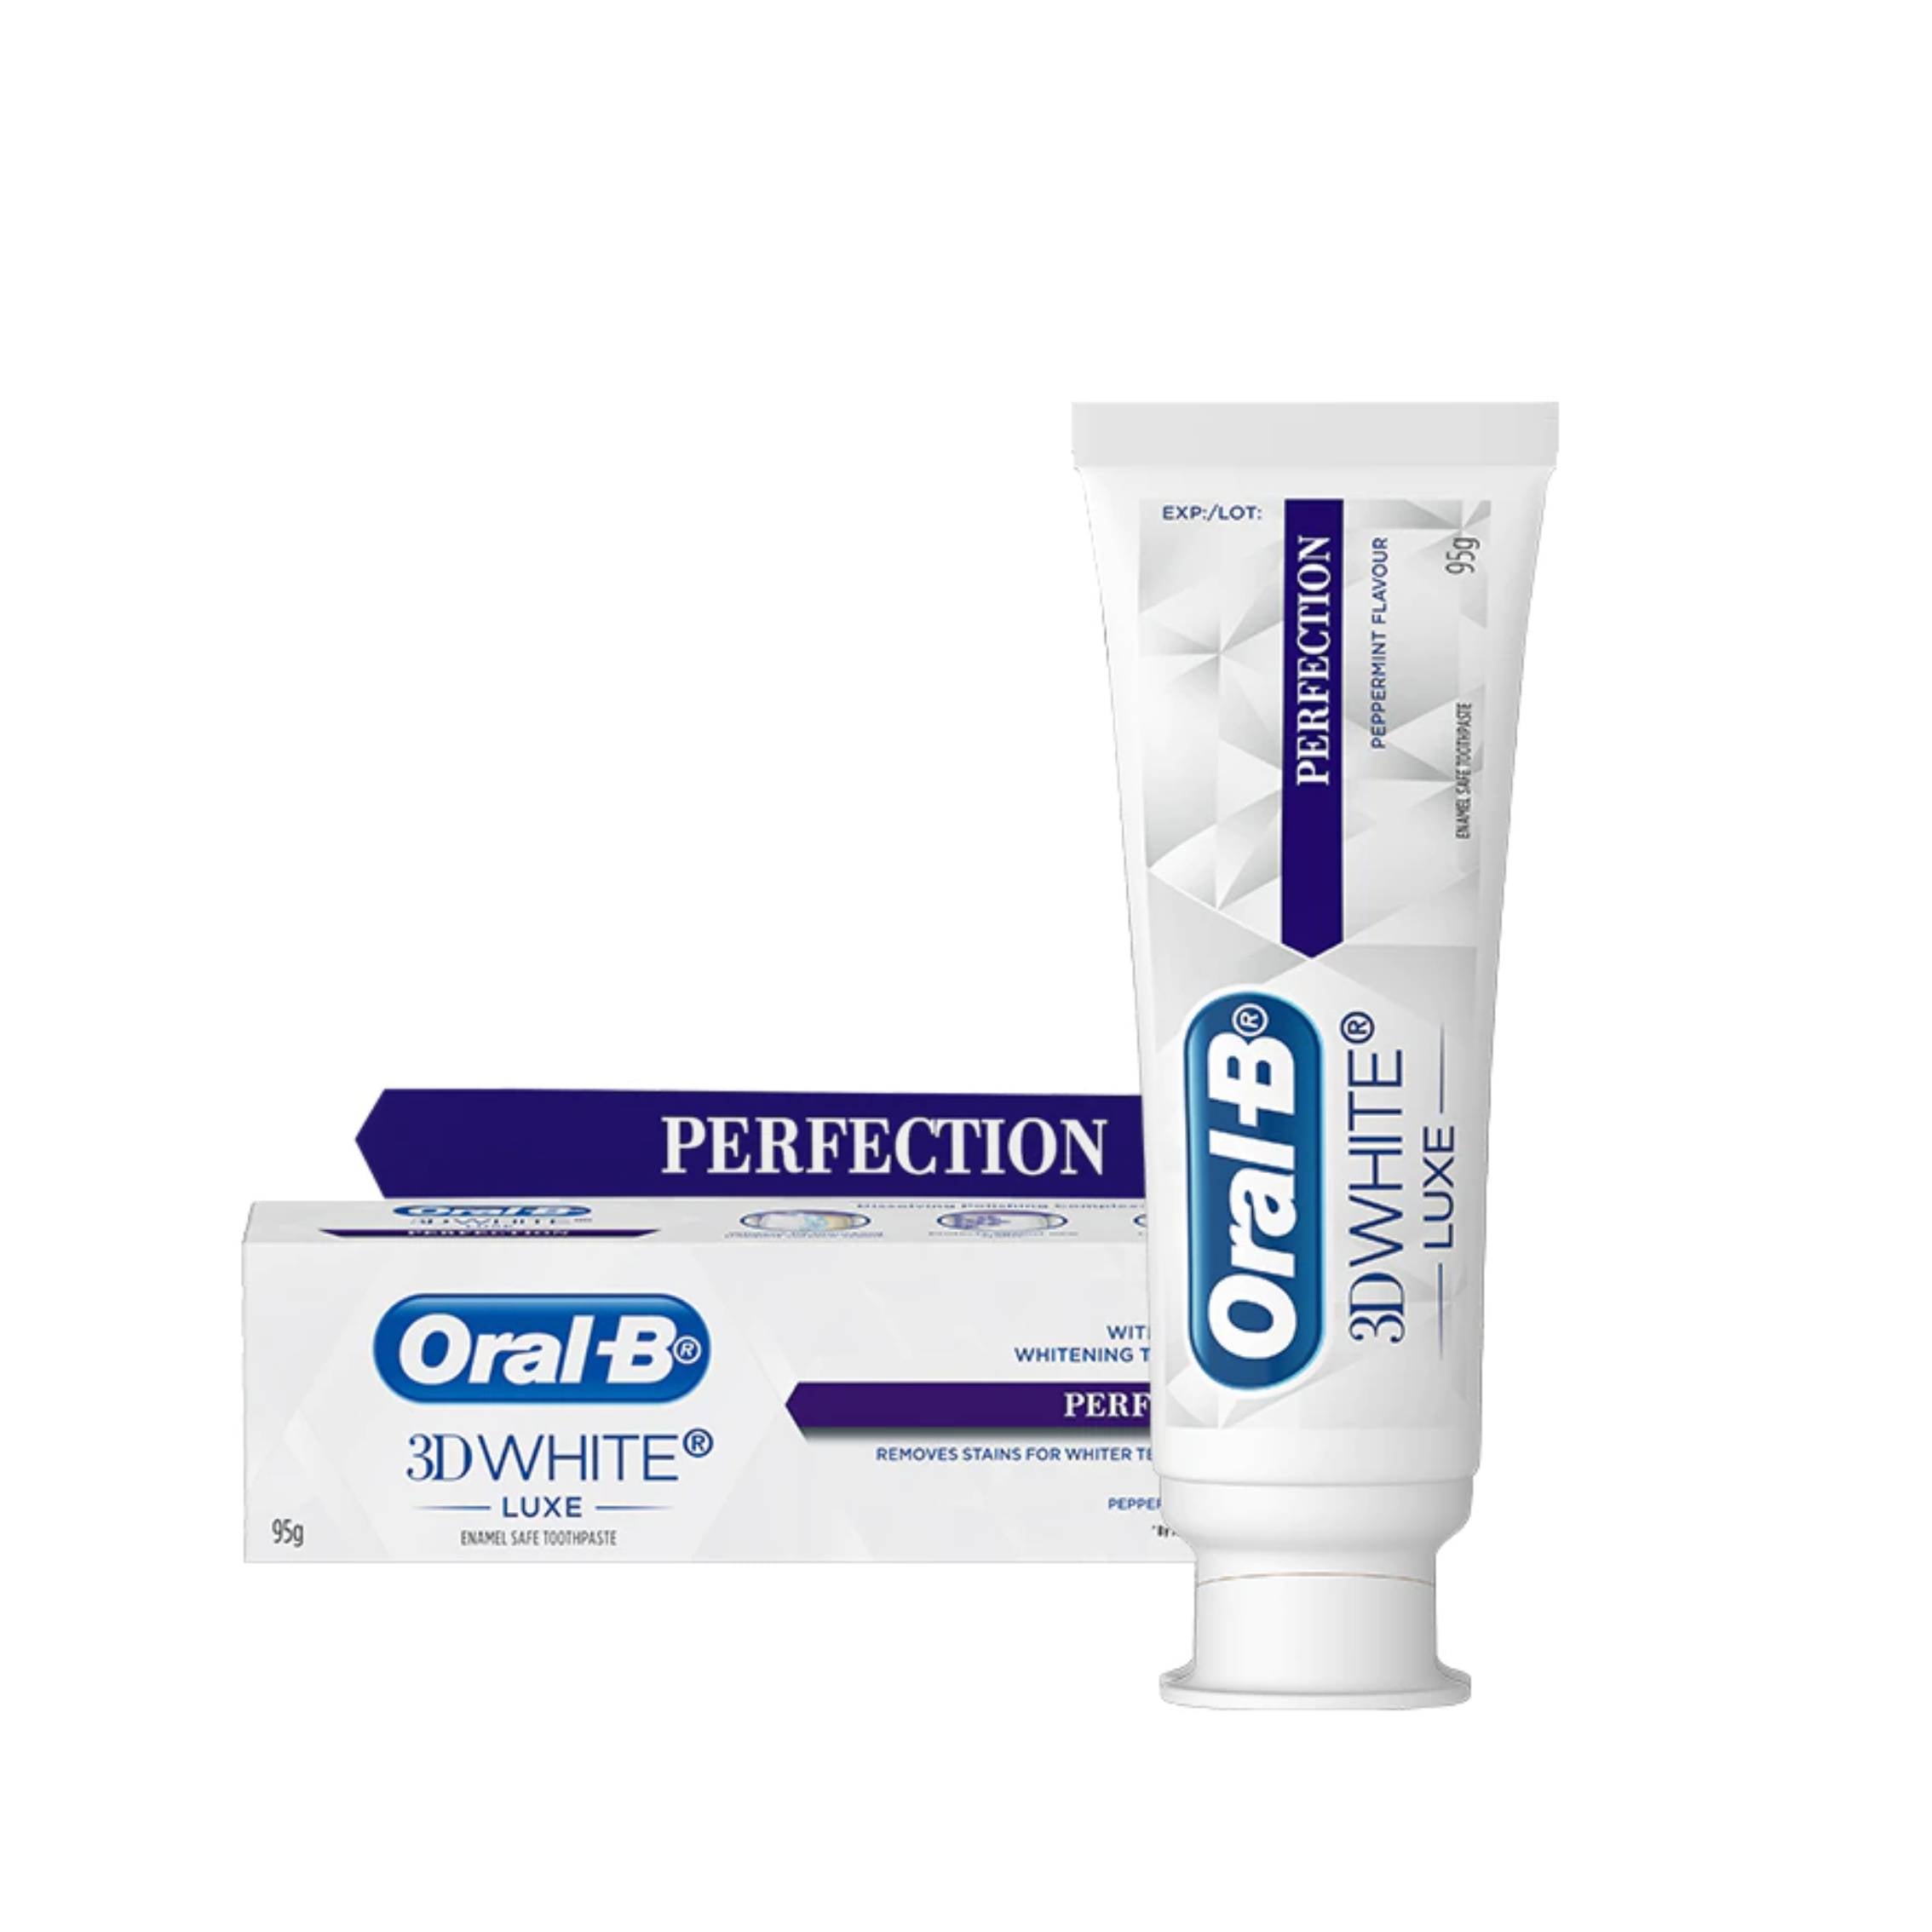 Oral B 3D White Lux Perfection Toothpaste - 95g - DoctorOnCall Farmasi Online